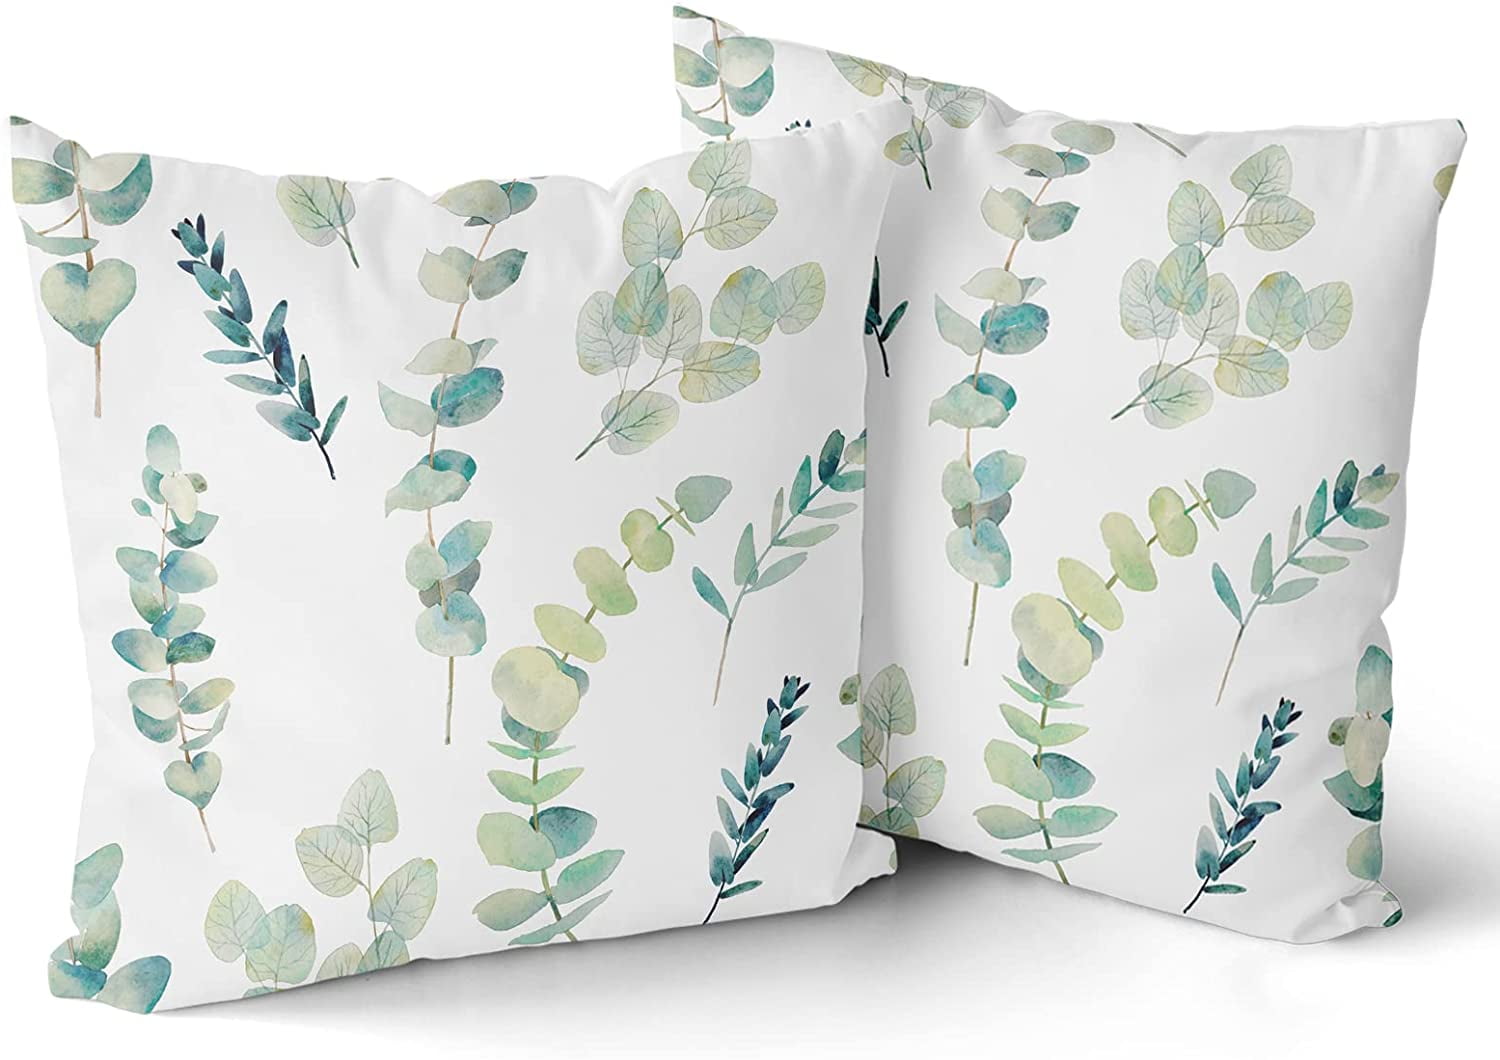 Seaweed Green Throw Pillow Covers 18x18 Set of 2 Fall Farmhouse Linen Print  Decorative Pillows for Couch Outdoor Pillows Case, Pillow Cover for Living